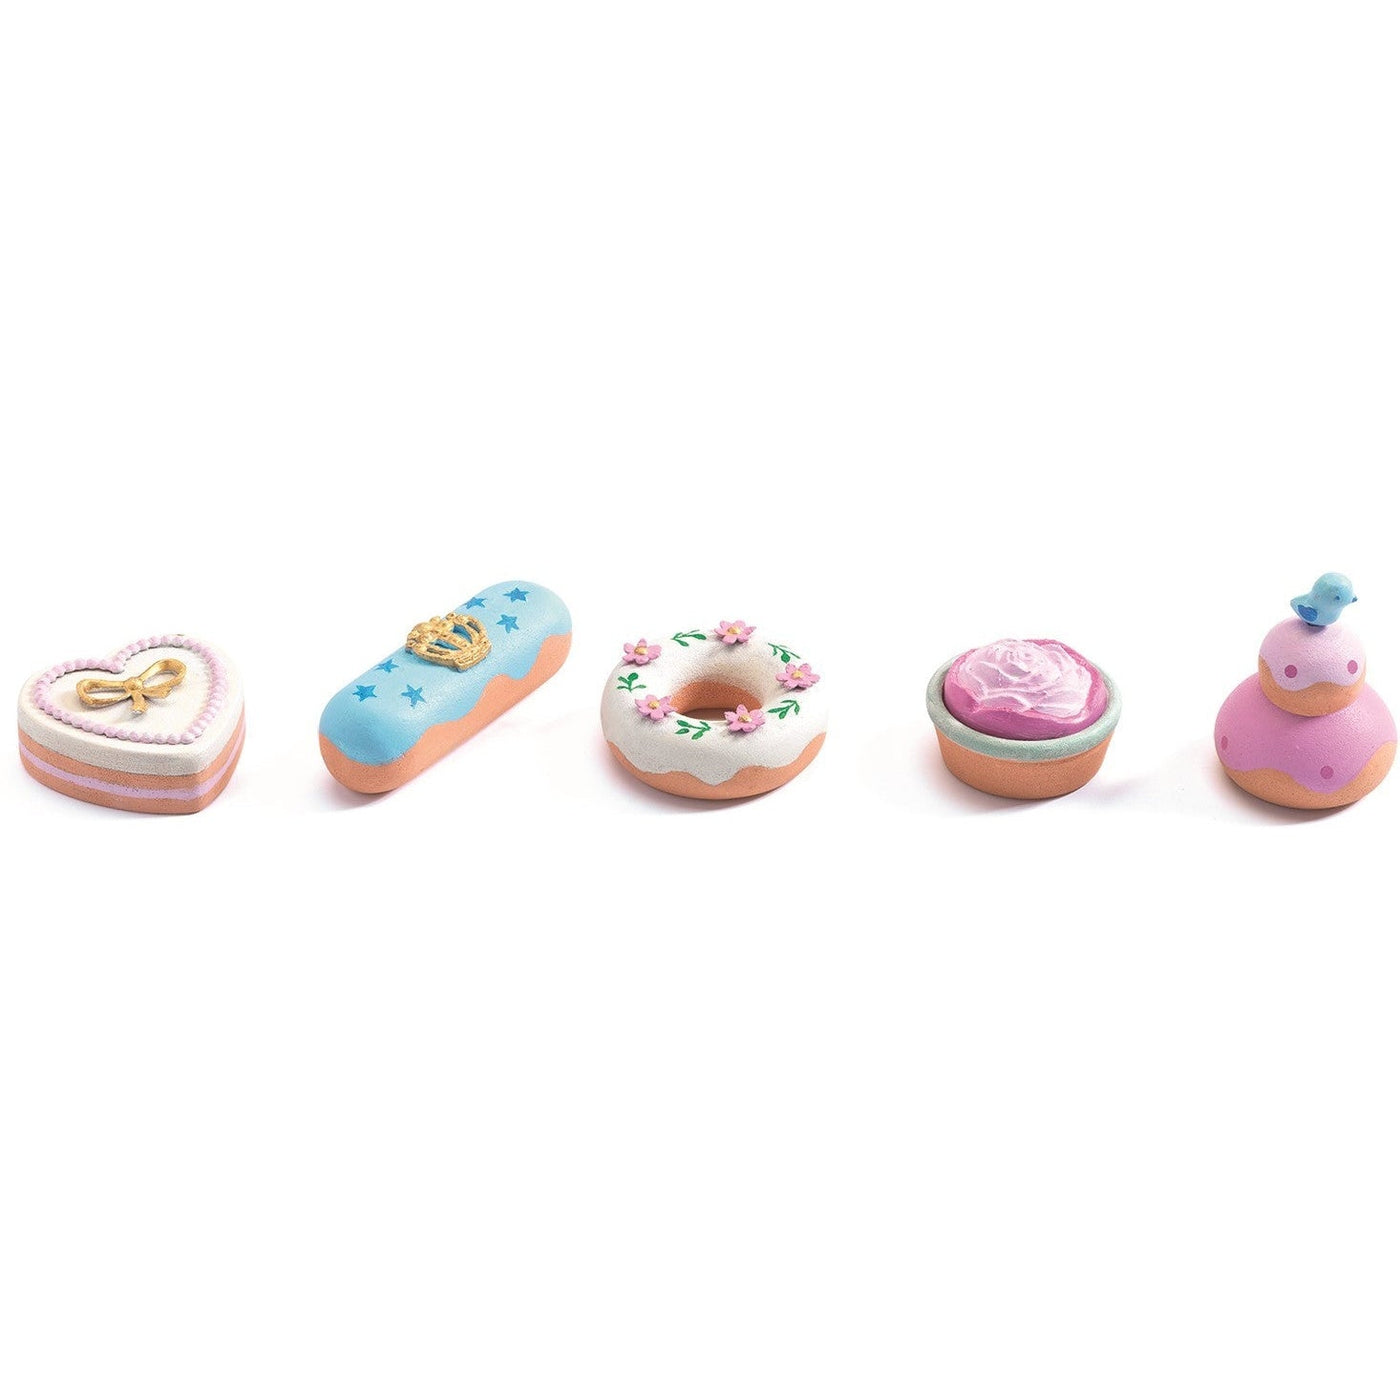 Princesses' Cakes - Role Play - Sweets